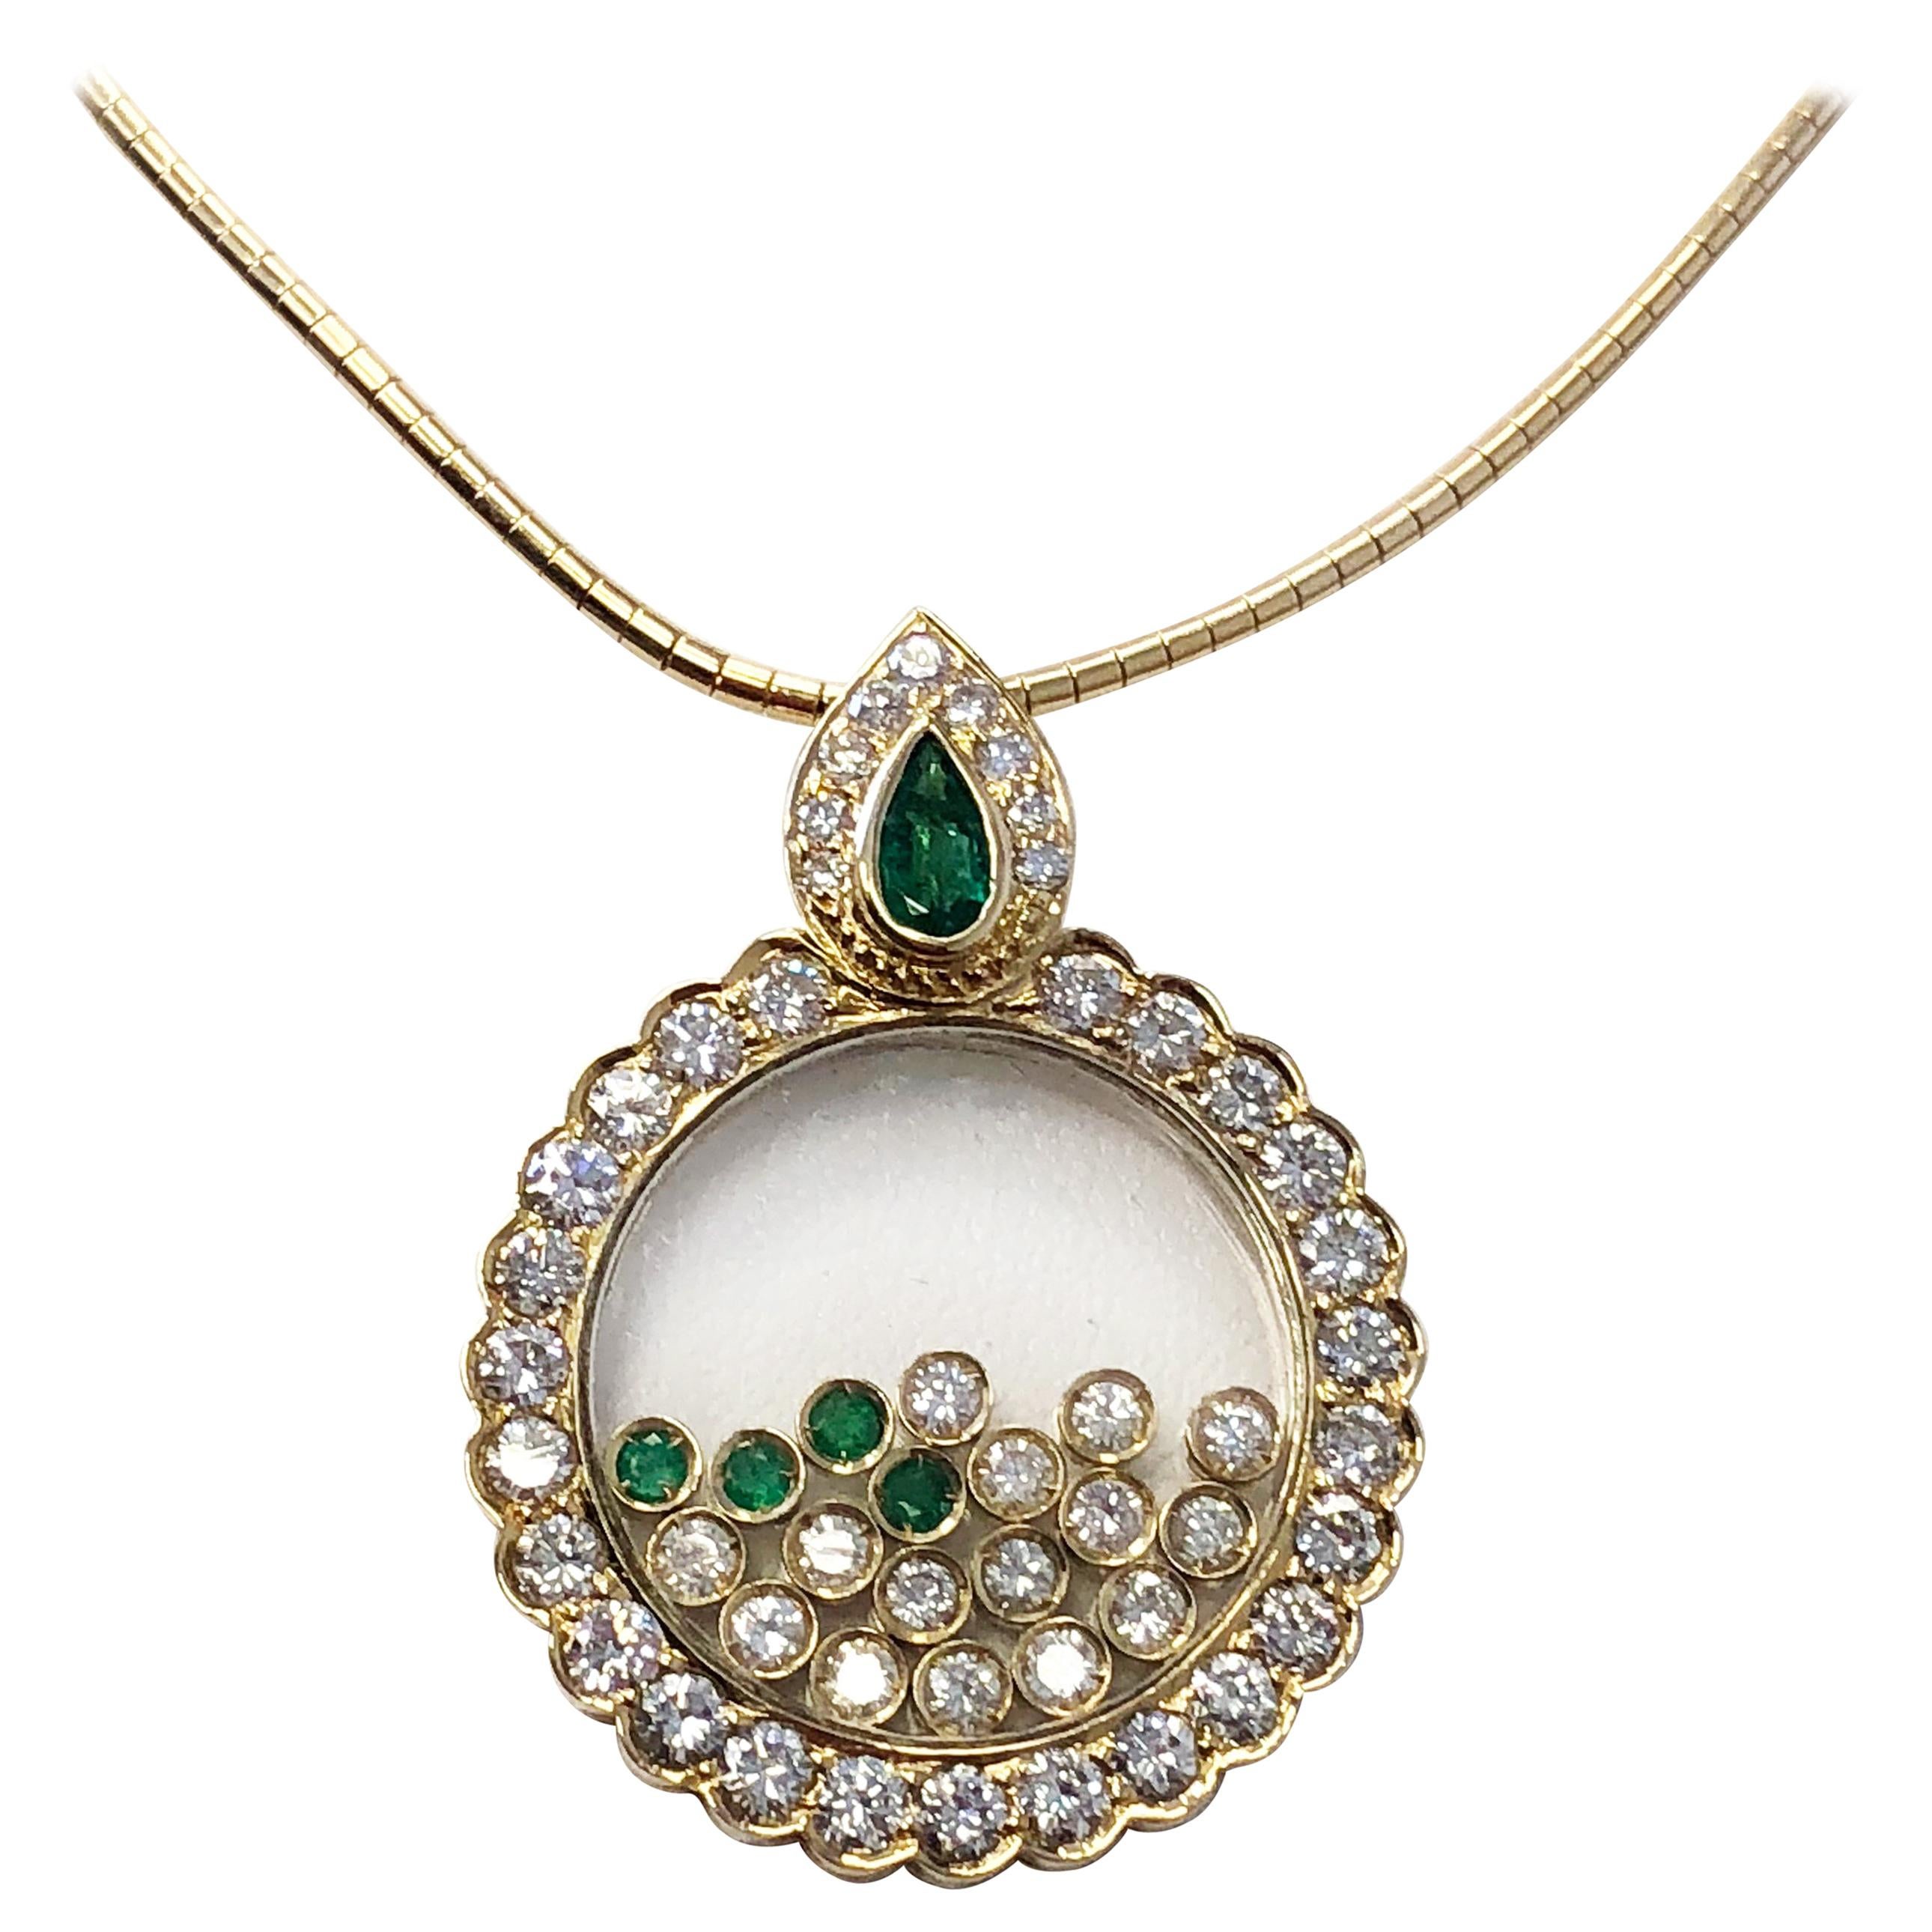 White Diamond and Emerald Movement Necklace in 18 Karat Yellow Gold